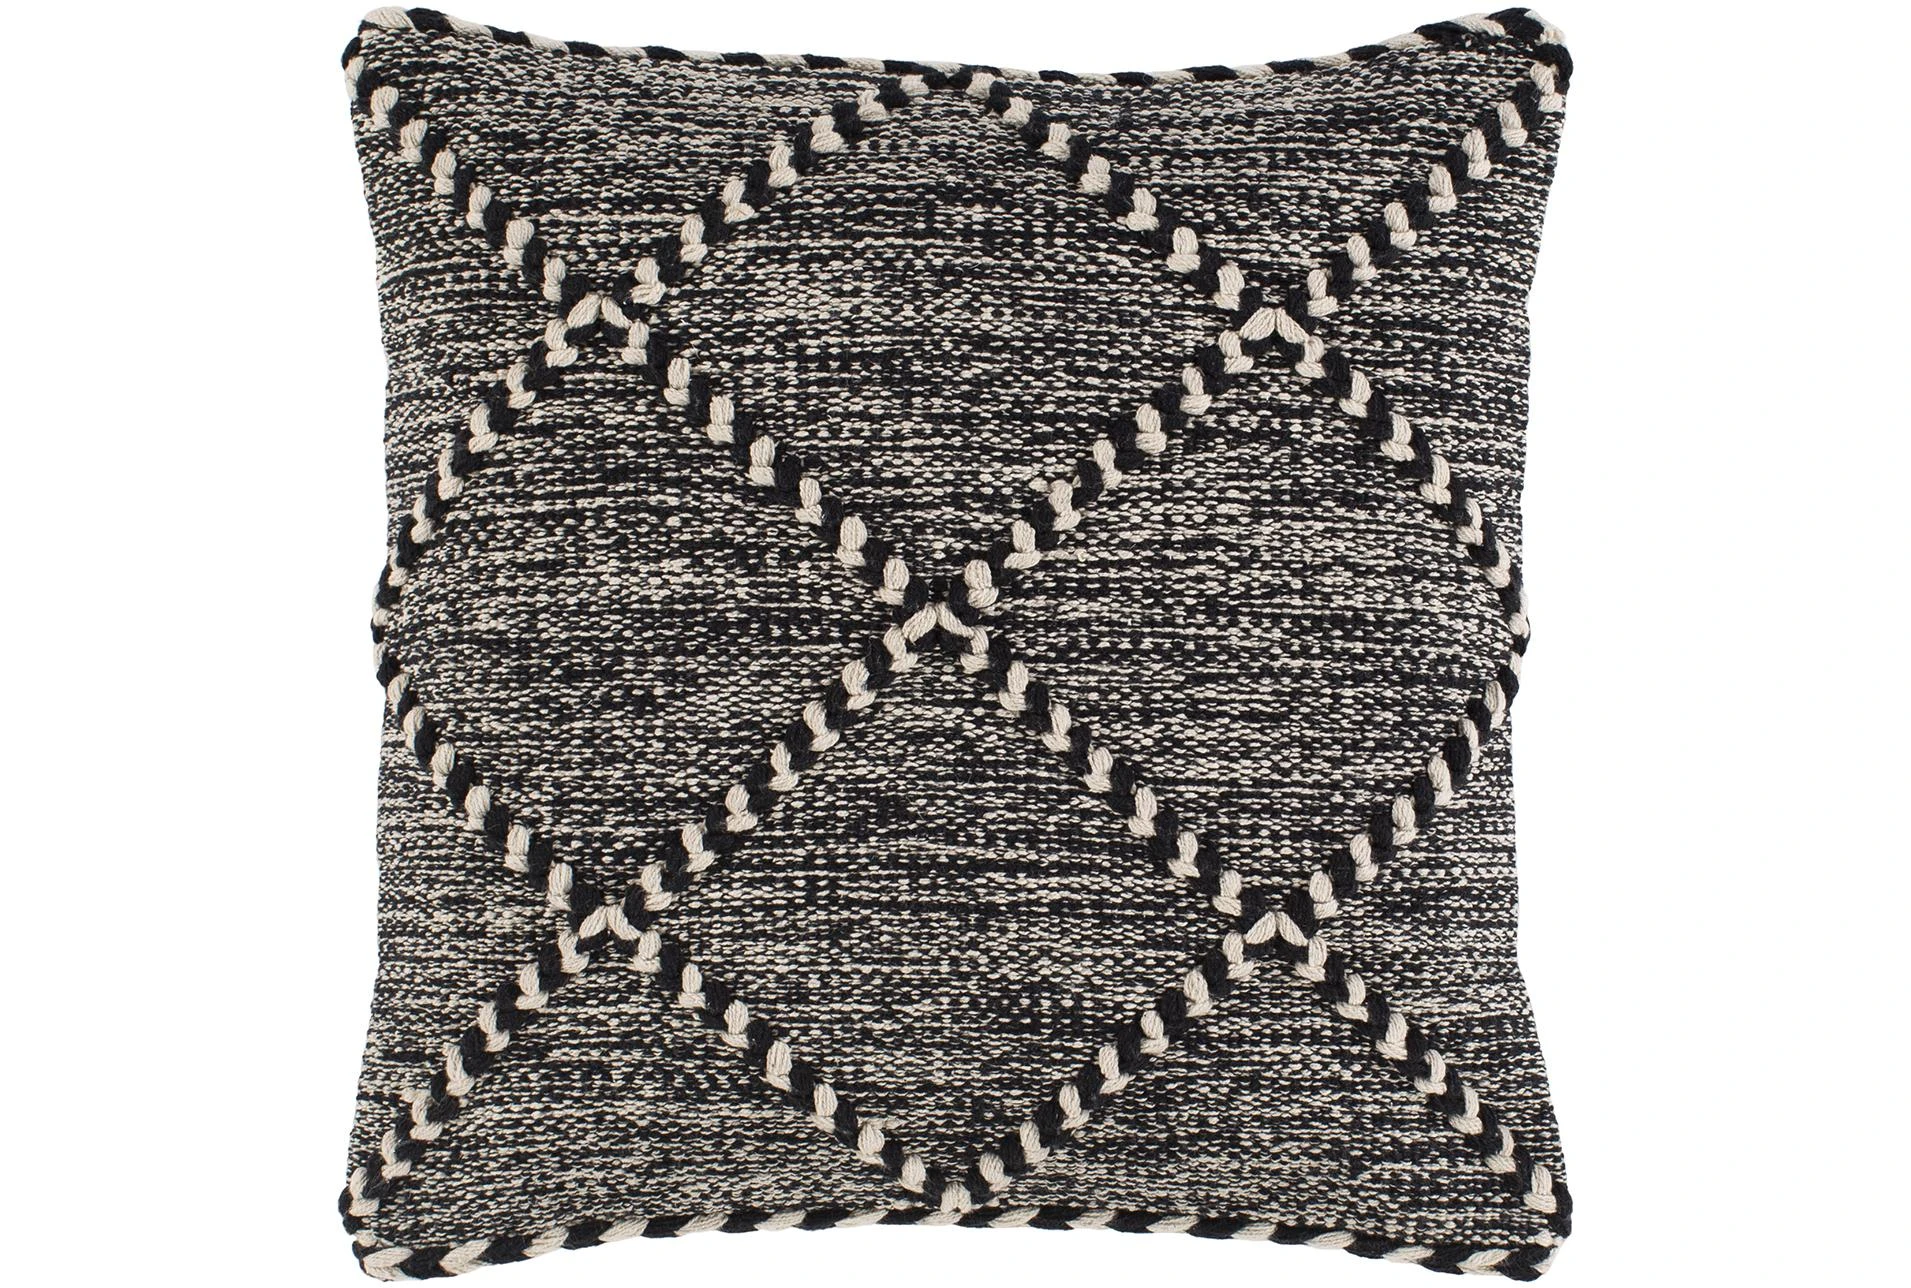 18 x 18 Handcrafted Cotton Accent Throw Pillows, Woven Lined Design, Set of  2, Black, Gray